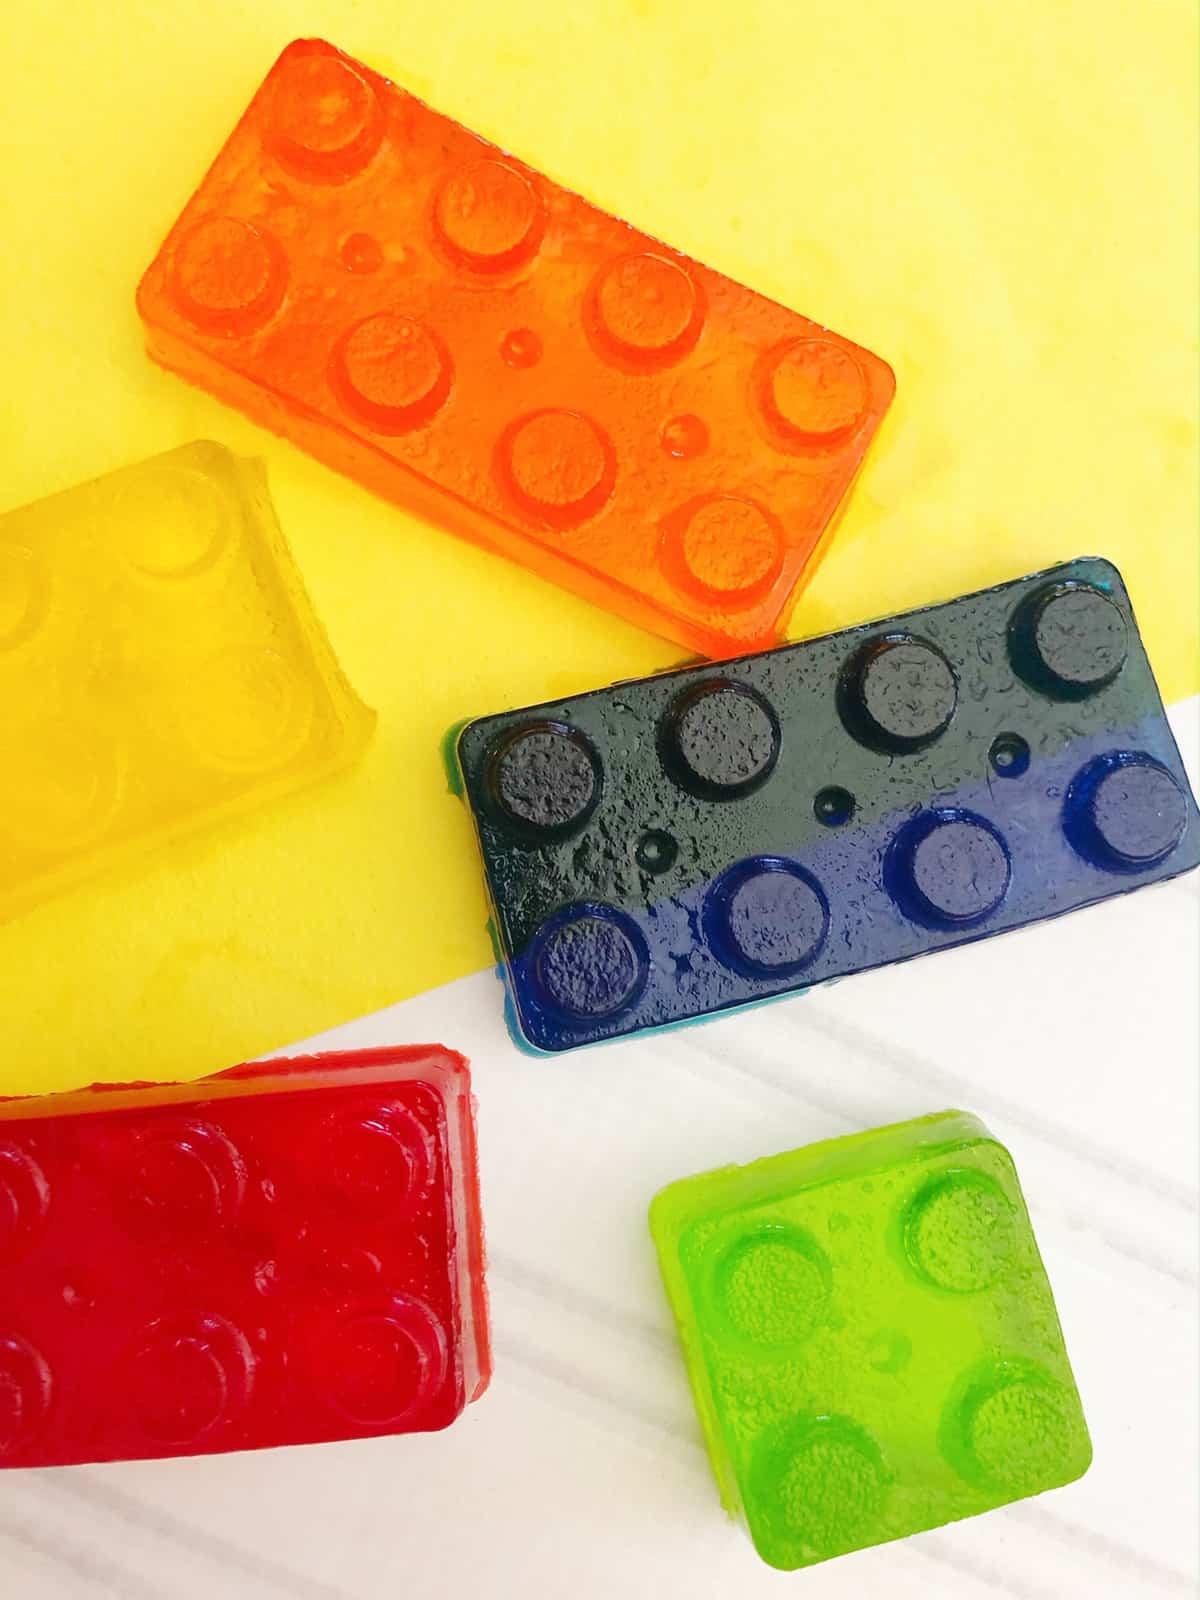 LEGO Jello Mold Instructions – An Easy Recipe for Kids